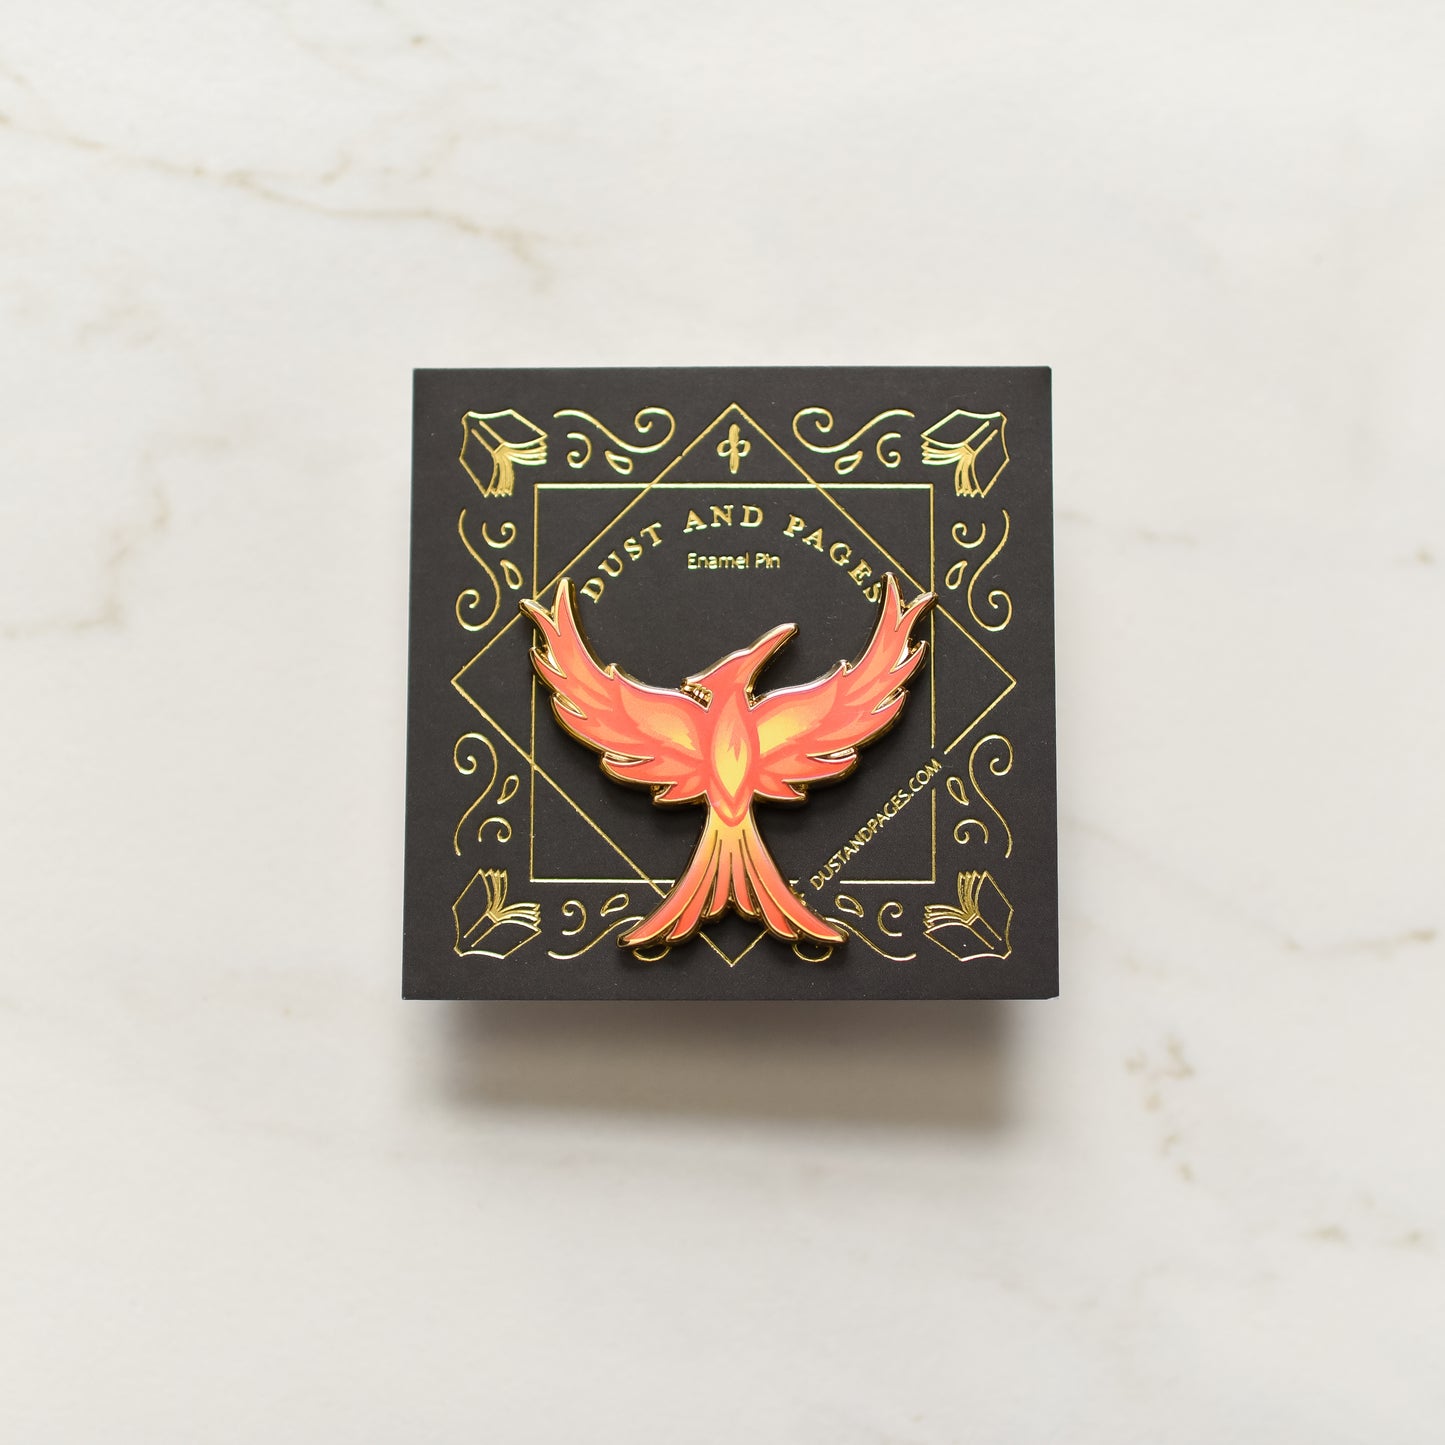 Mockingjay with red orange and yellow flame details enamel pin on a black and gold foil backing card